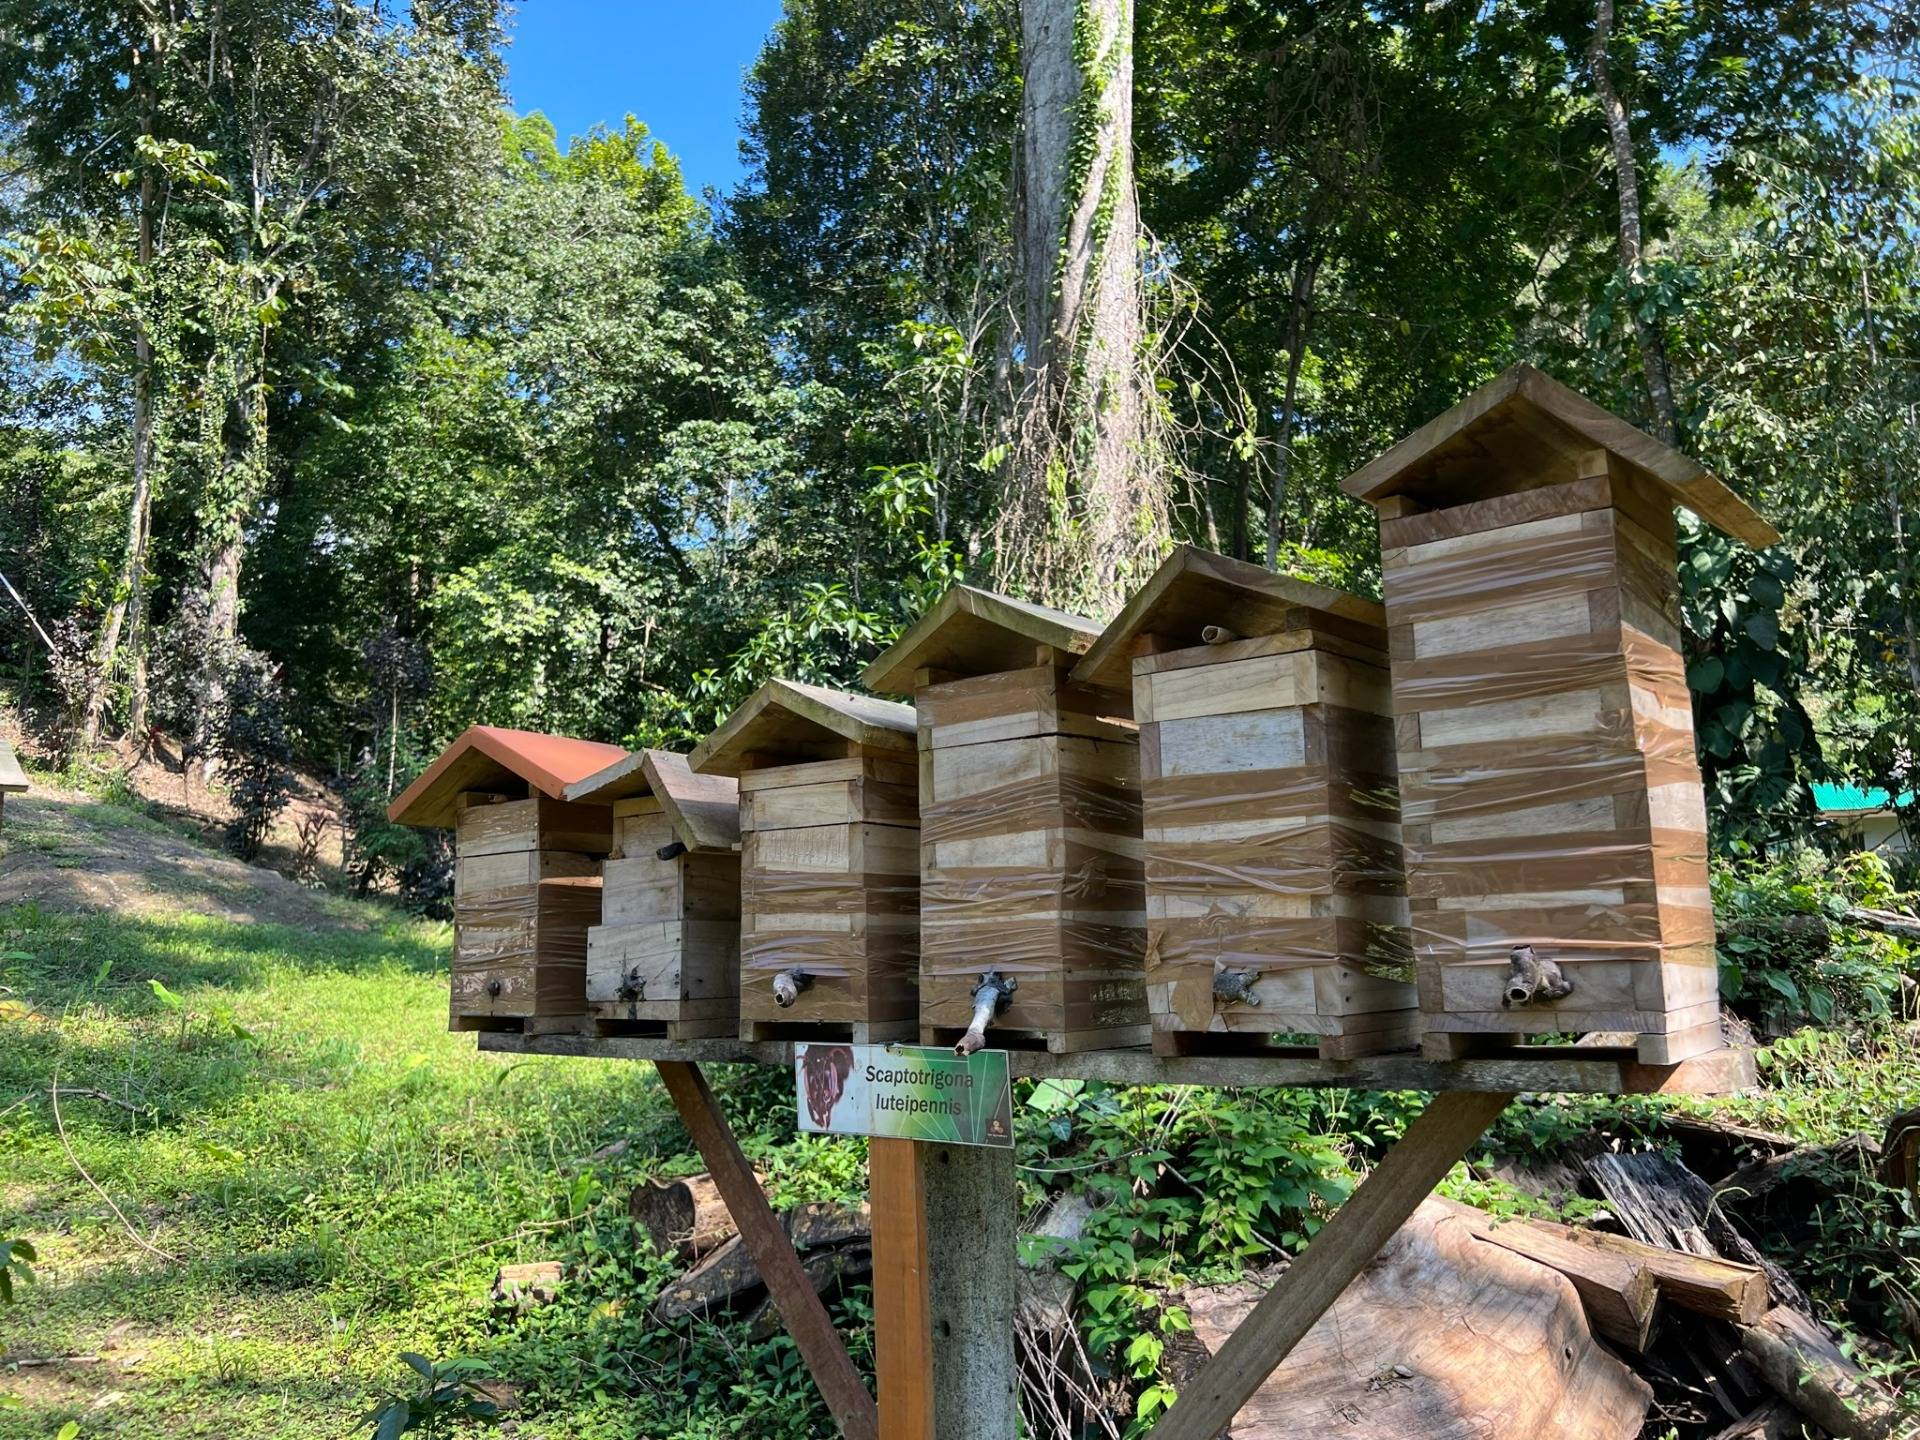 Excursion to the apiary with bees without stingers in Costa Rica. Cruise in the Southern Caribbean.